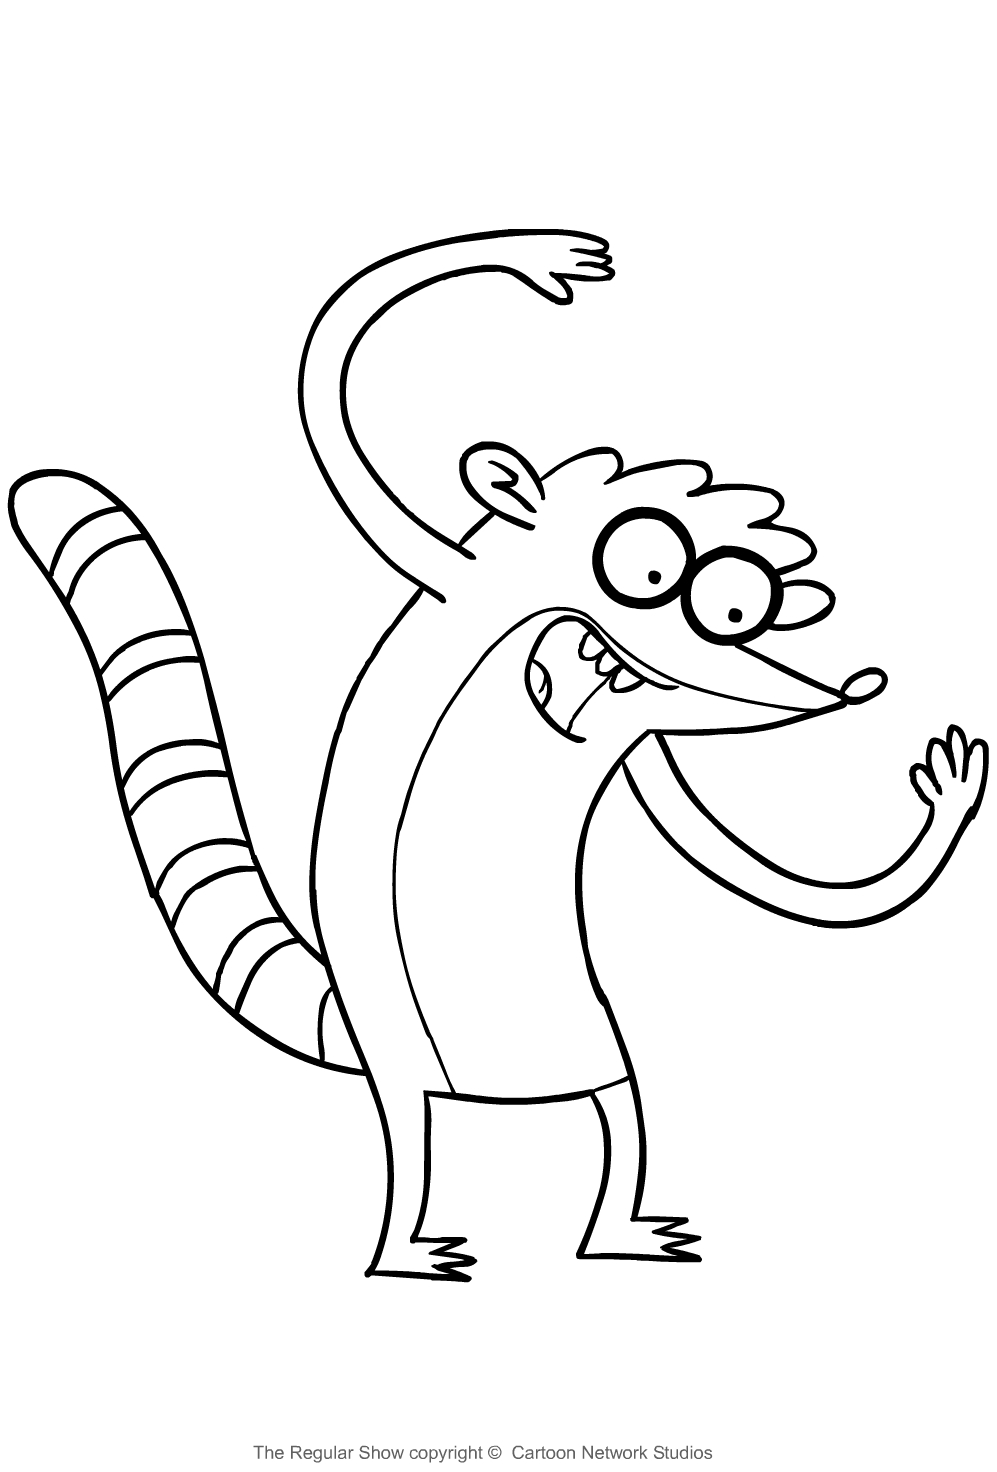 Rigby from Regular Show coloring page to print and coloring